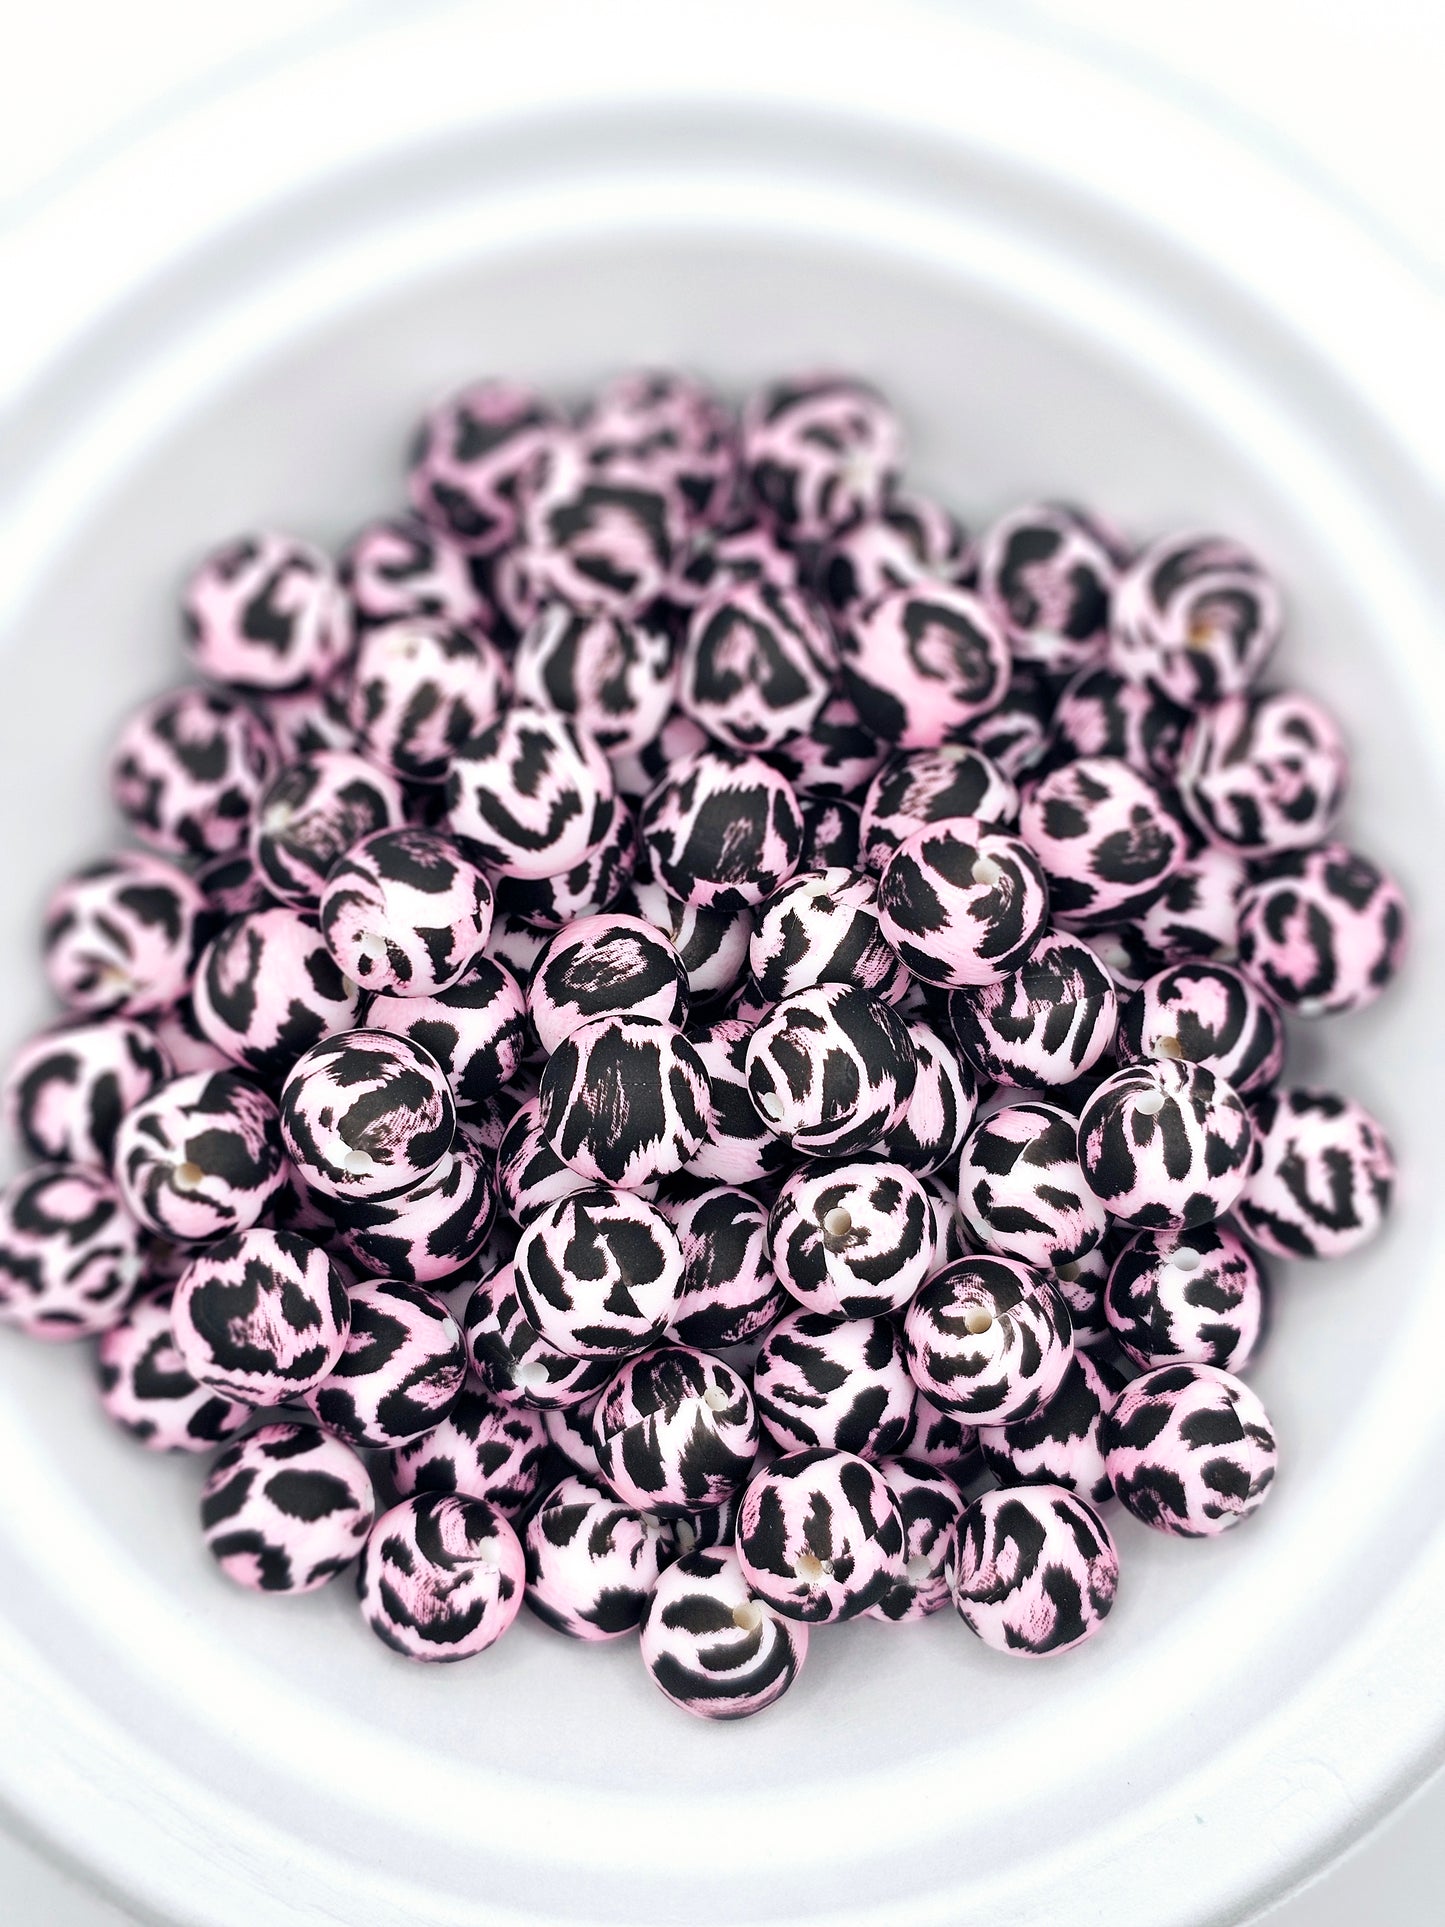 Light pink and black cheetah print 15mm silicone round bead